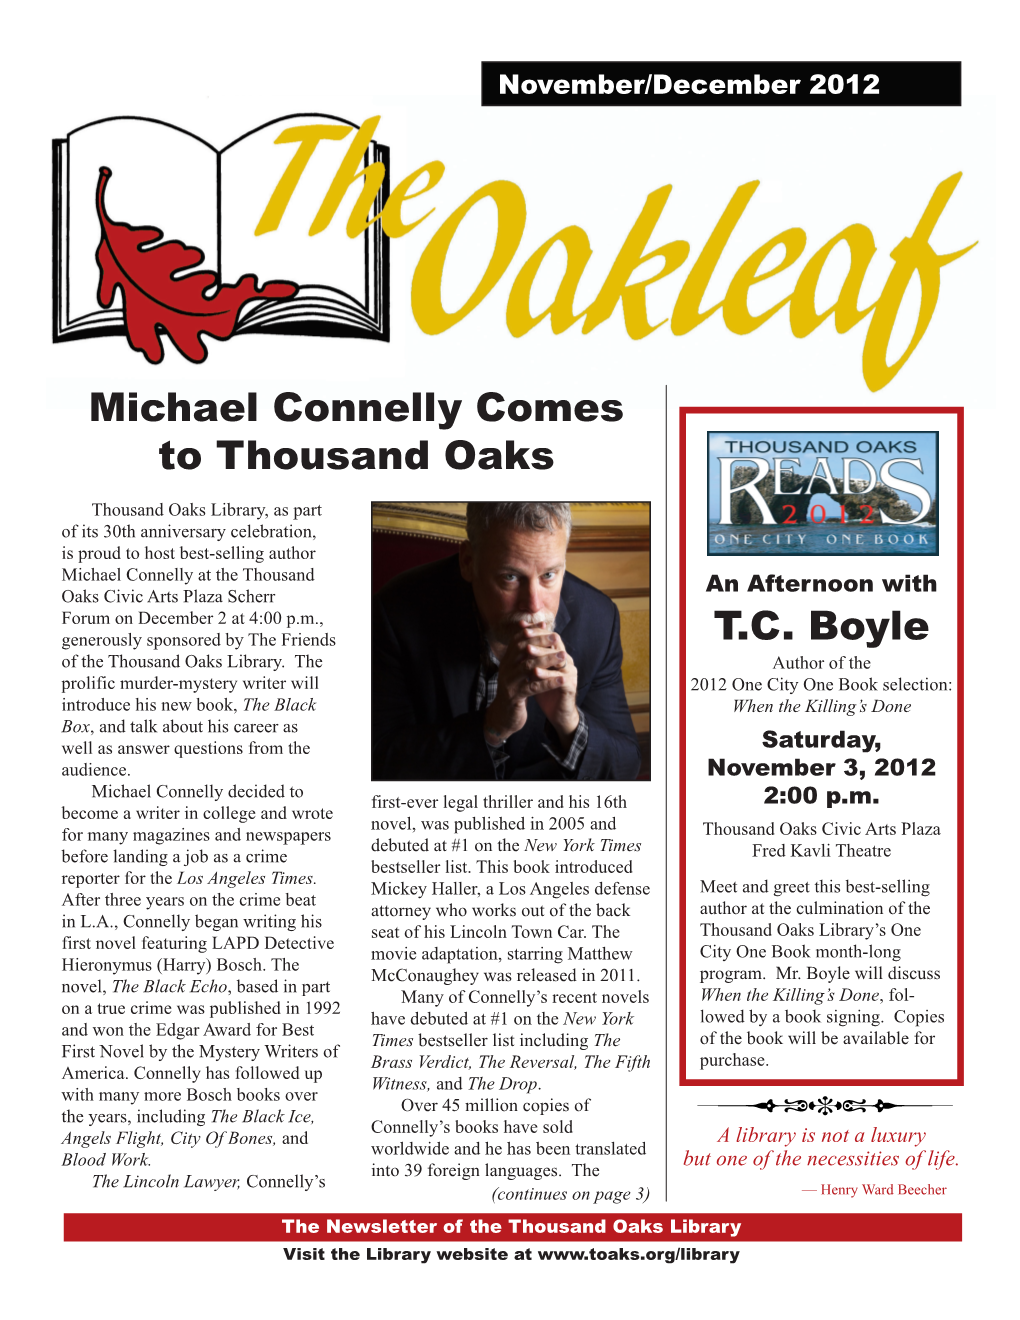 Michael Connelly Comes to Thousand Oaks T.C. Boyle